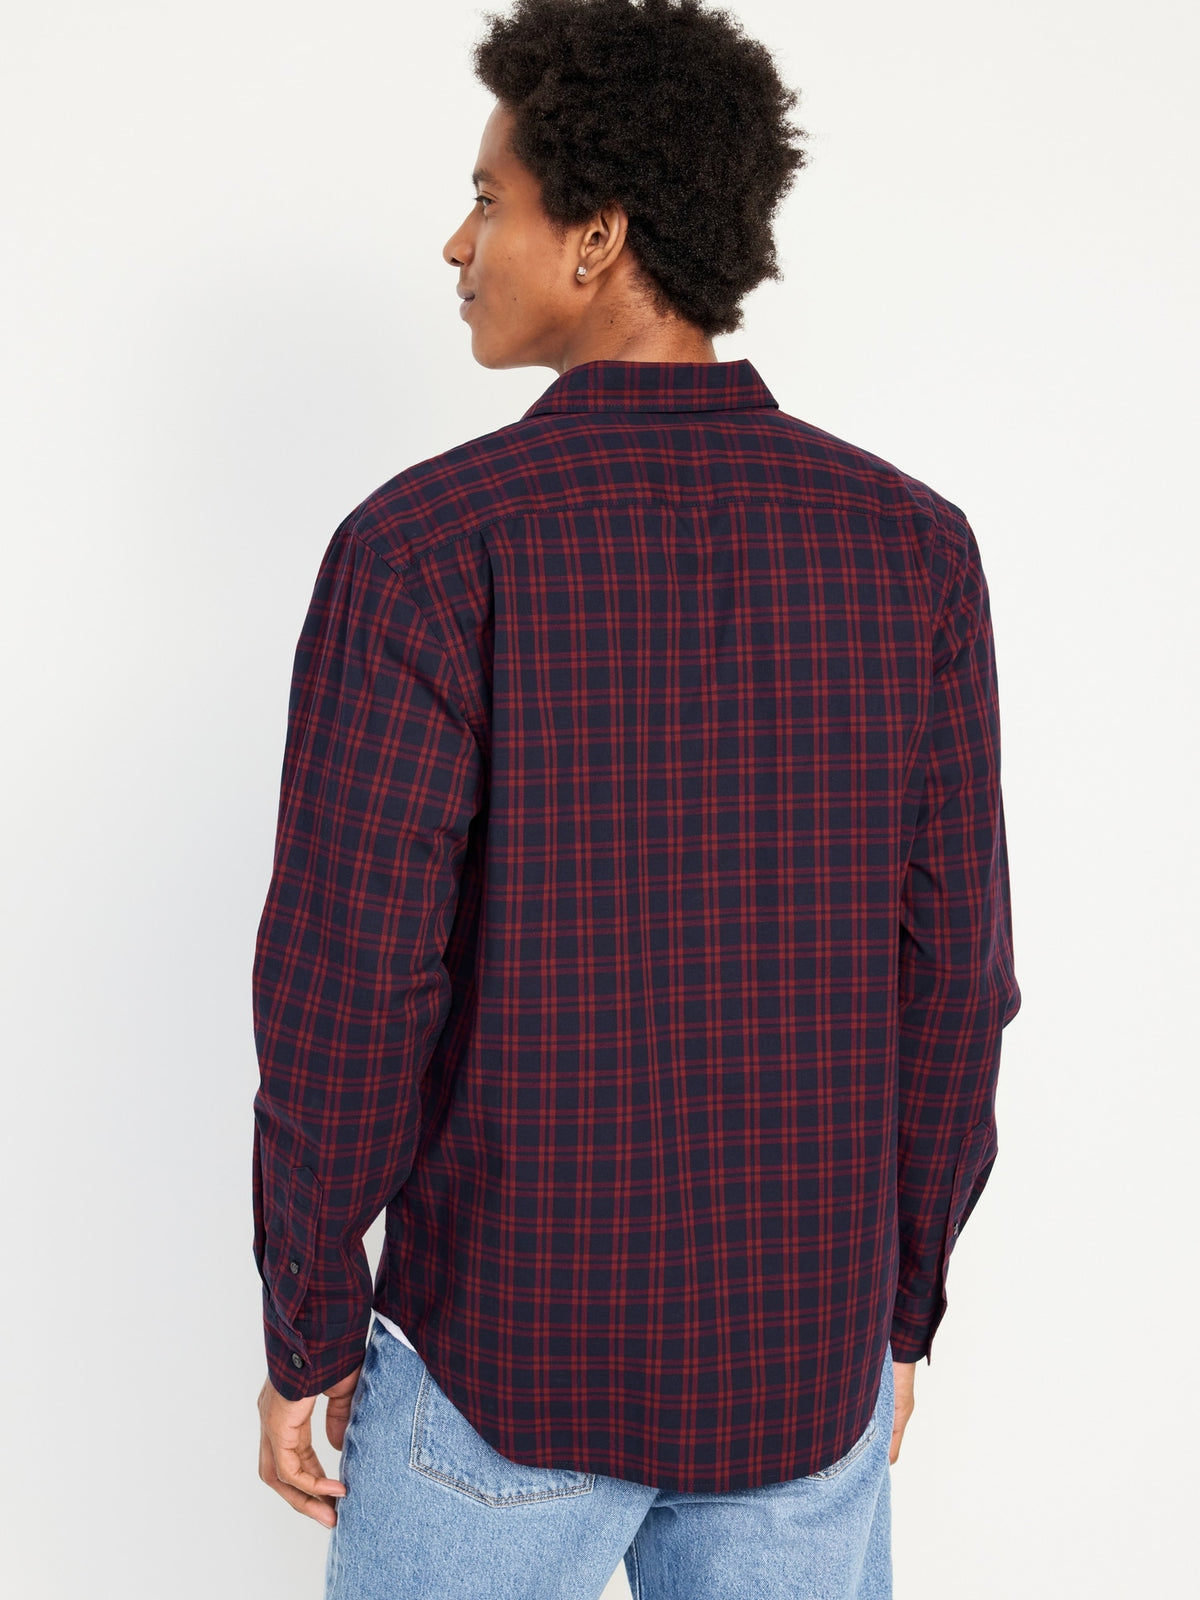 Navy/Red Plaid